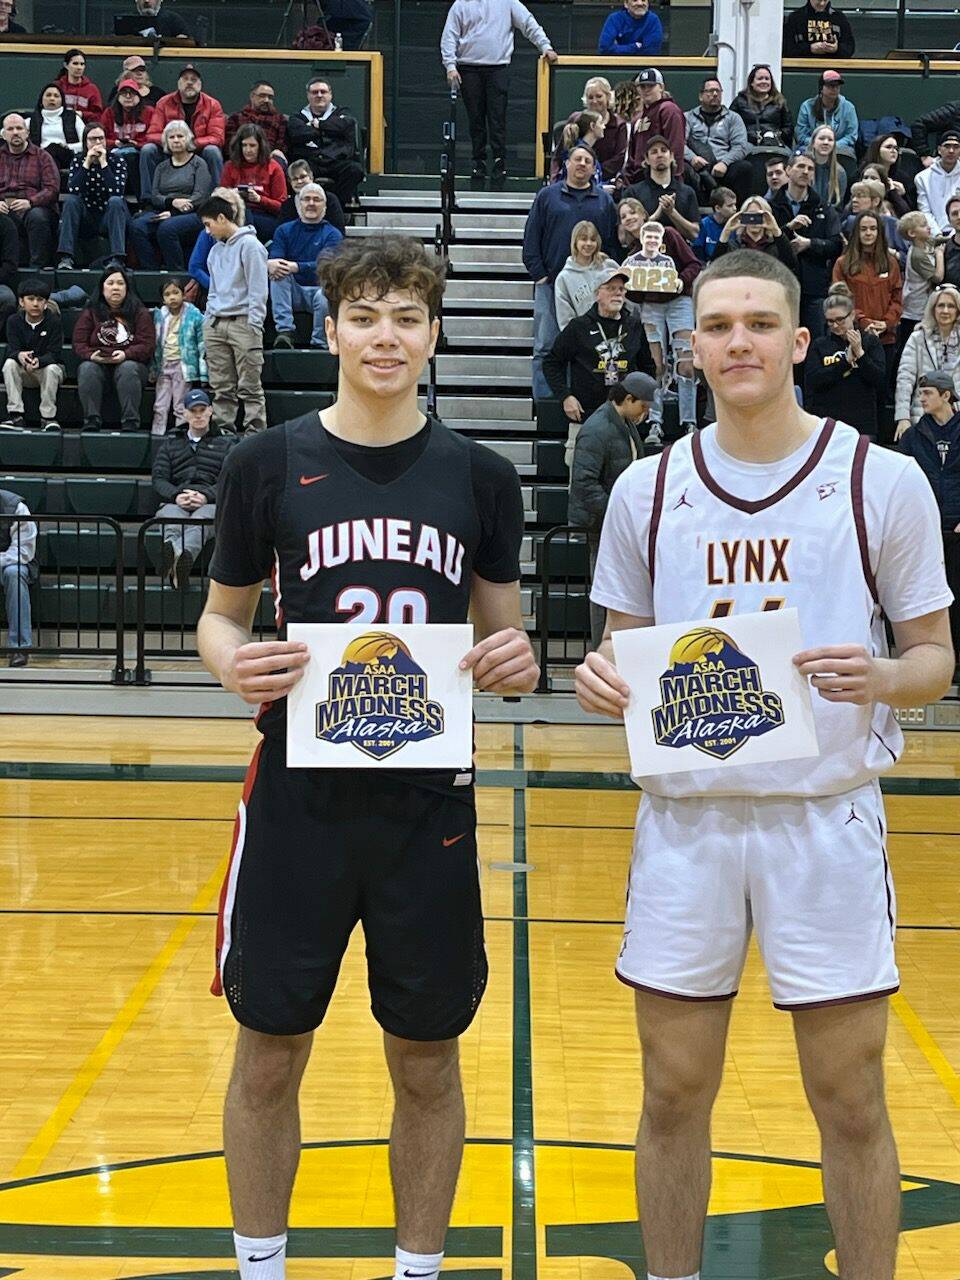 Courtesy Photo / Robert Casperson 
JDHS senior Orion Dybdahl and Dimond senior Maguire Hamey earn Player of the Game honors for each of their schools. Dybdahl finished the game with a total of 14 points and Hamey with 8 points.